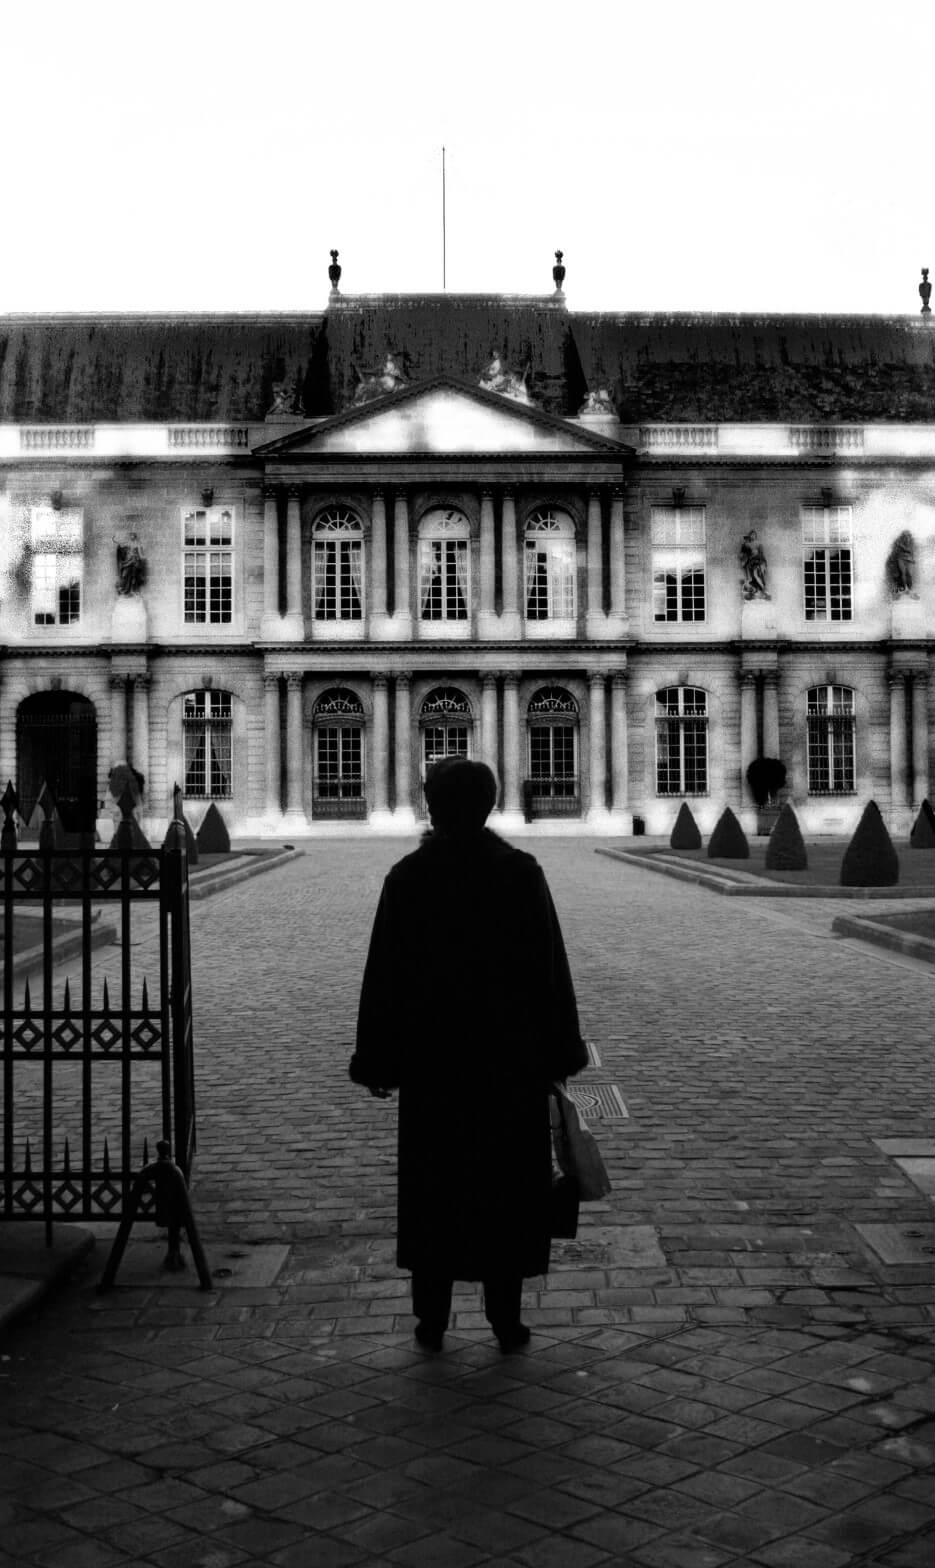 Black and white photo by Erica Simone depecting a woman staring at a large chateau in France